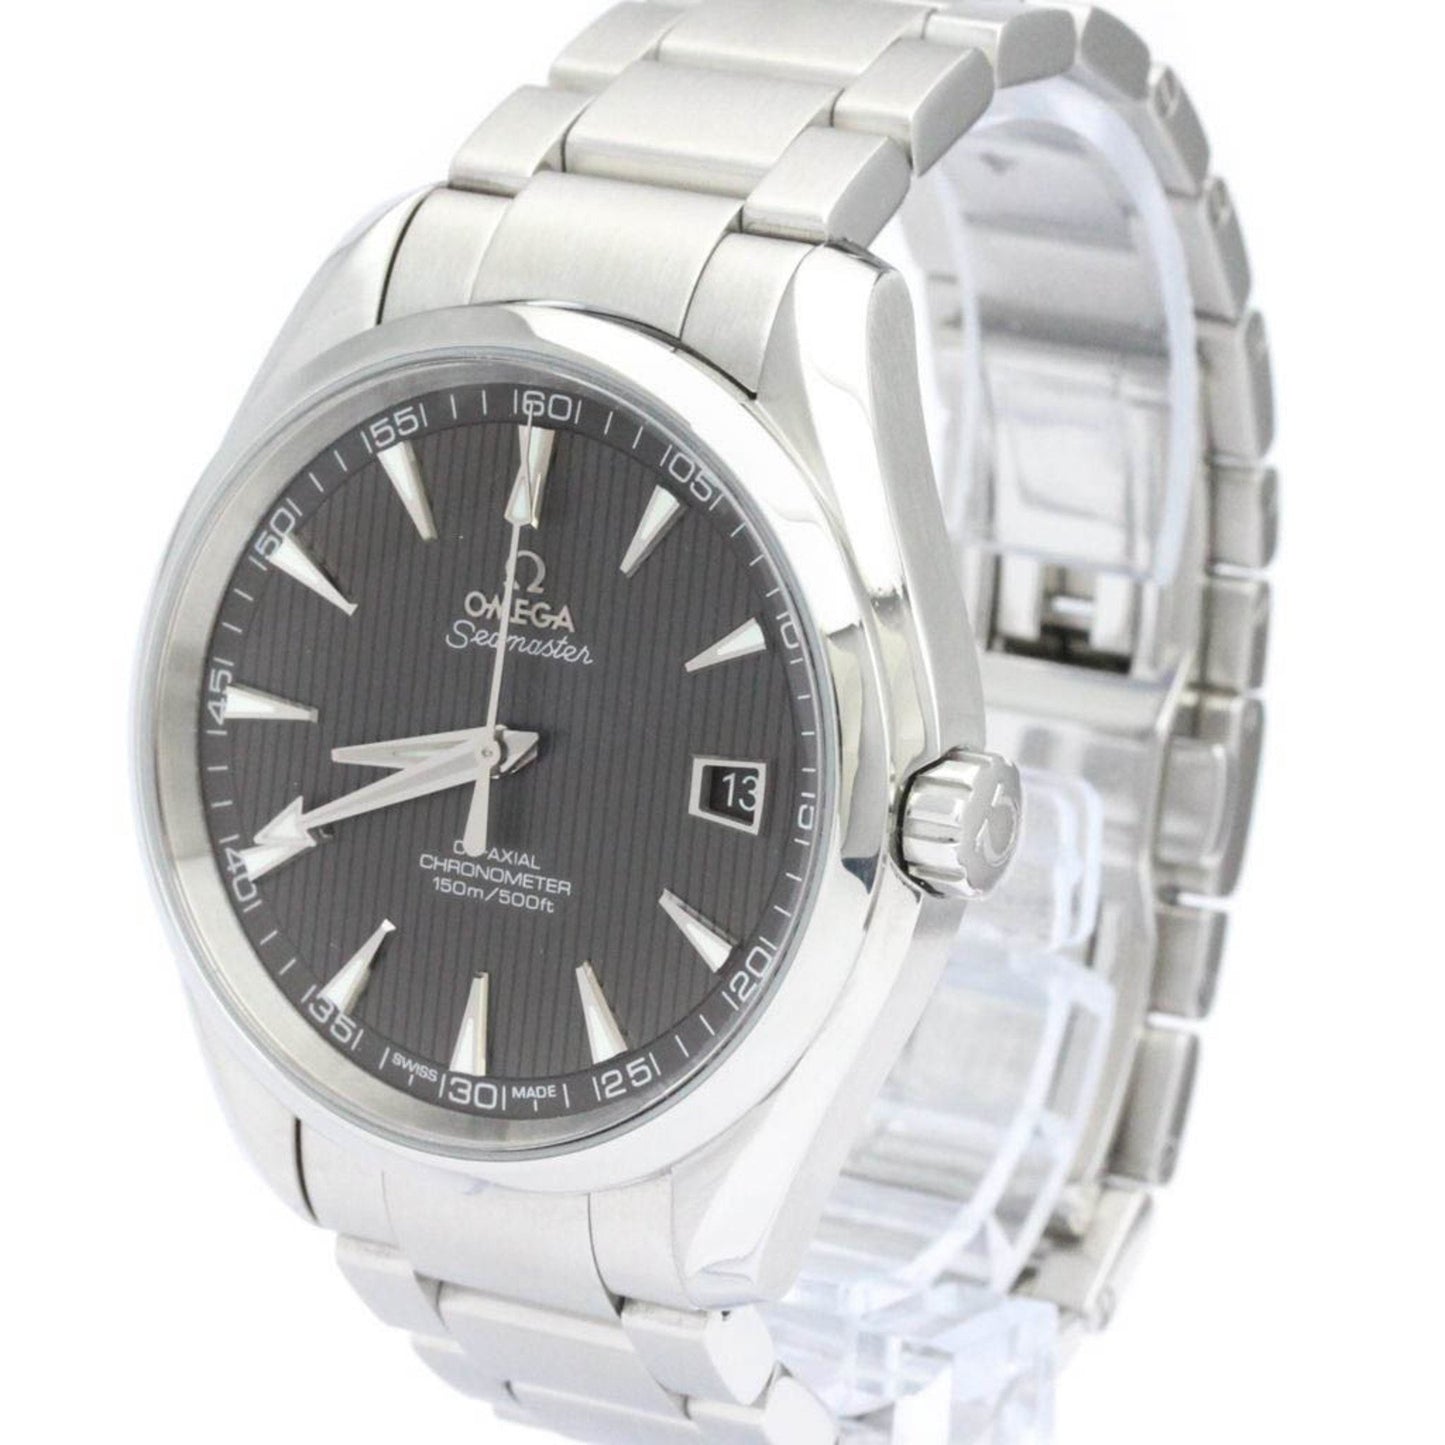 Omega Men's Classic Grey Steel Chronograph Watch in Grey